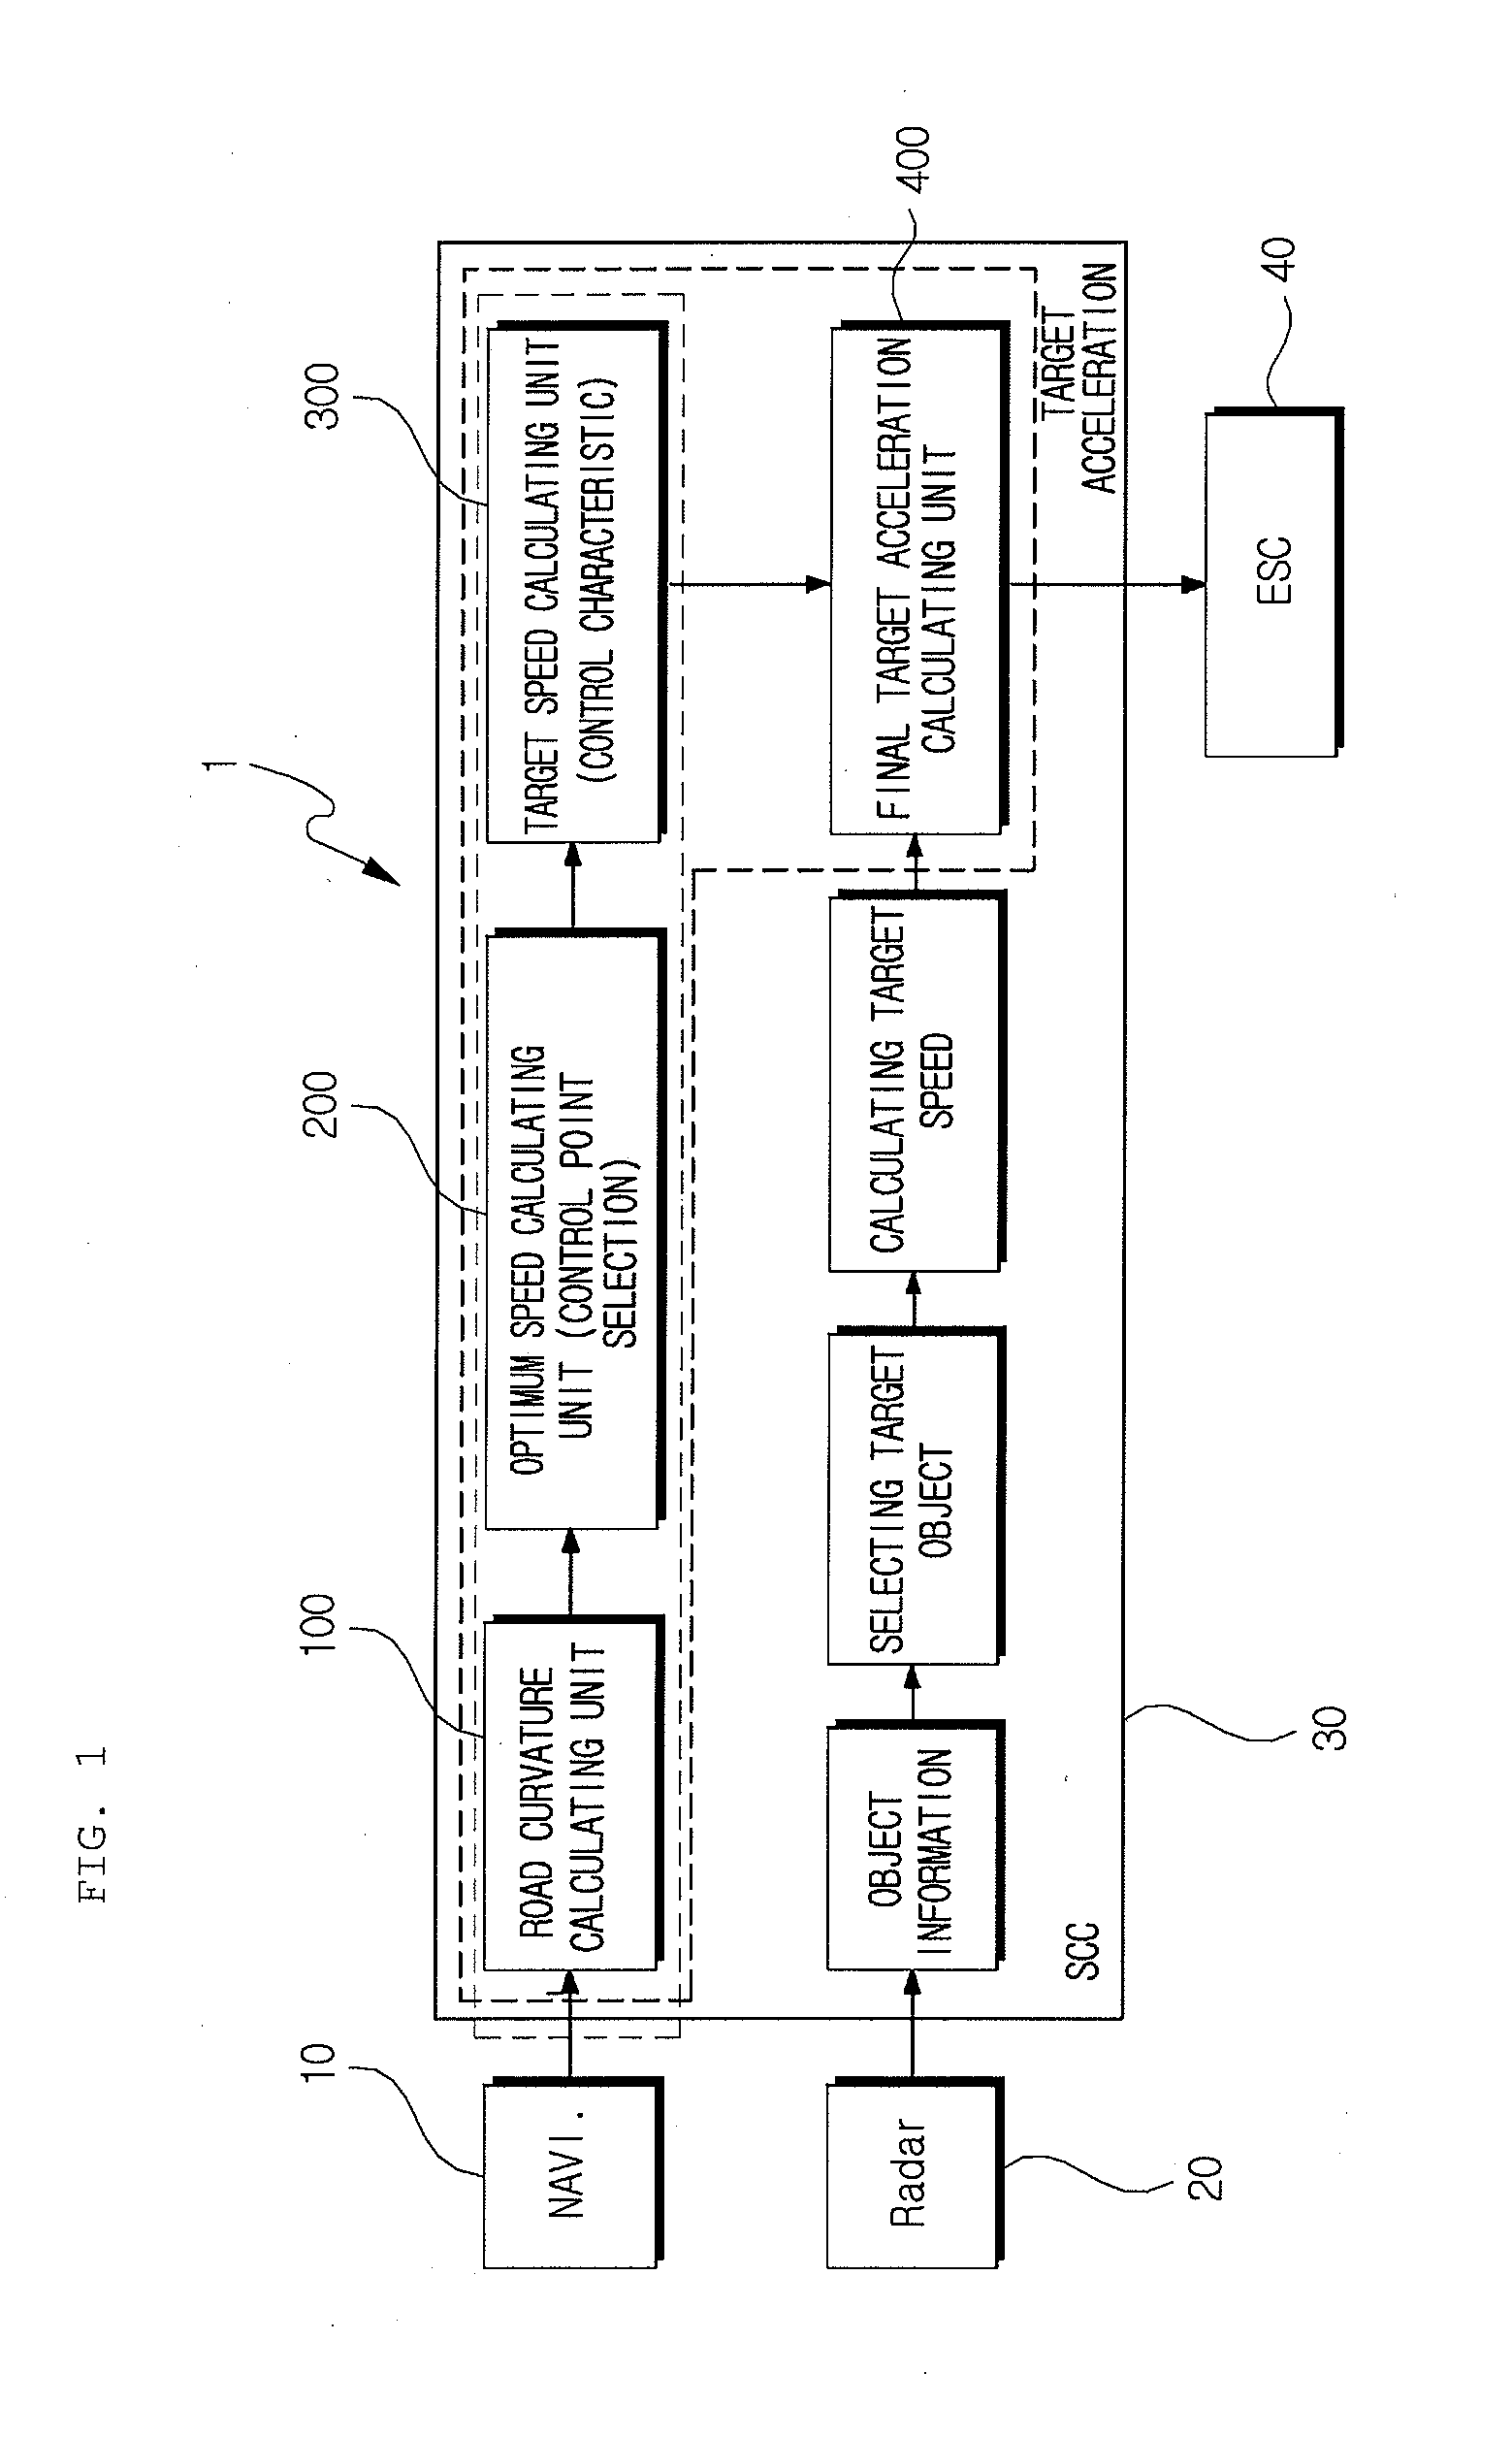 Automatic driving control system